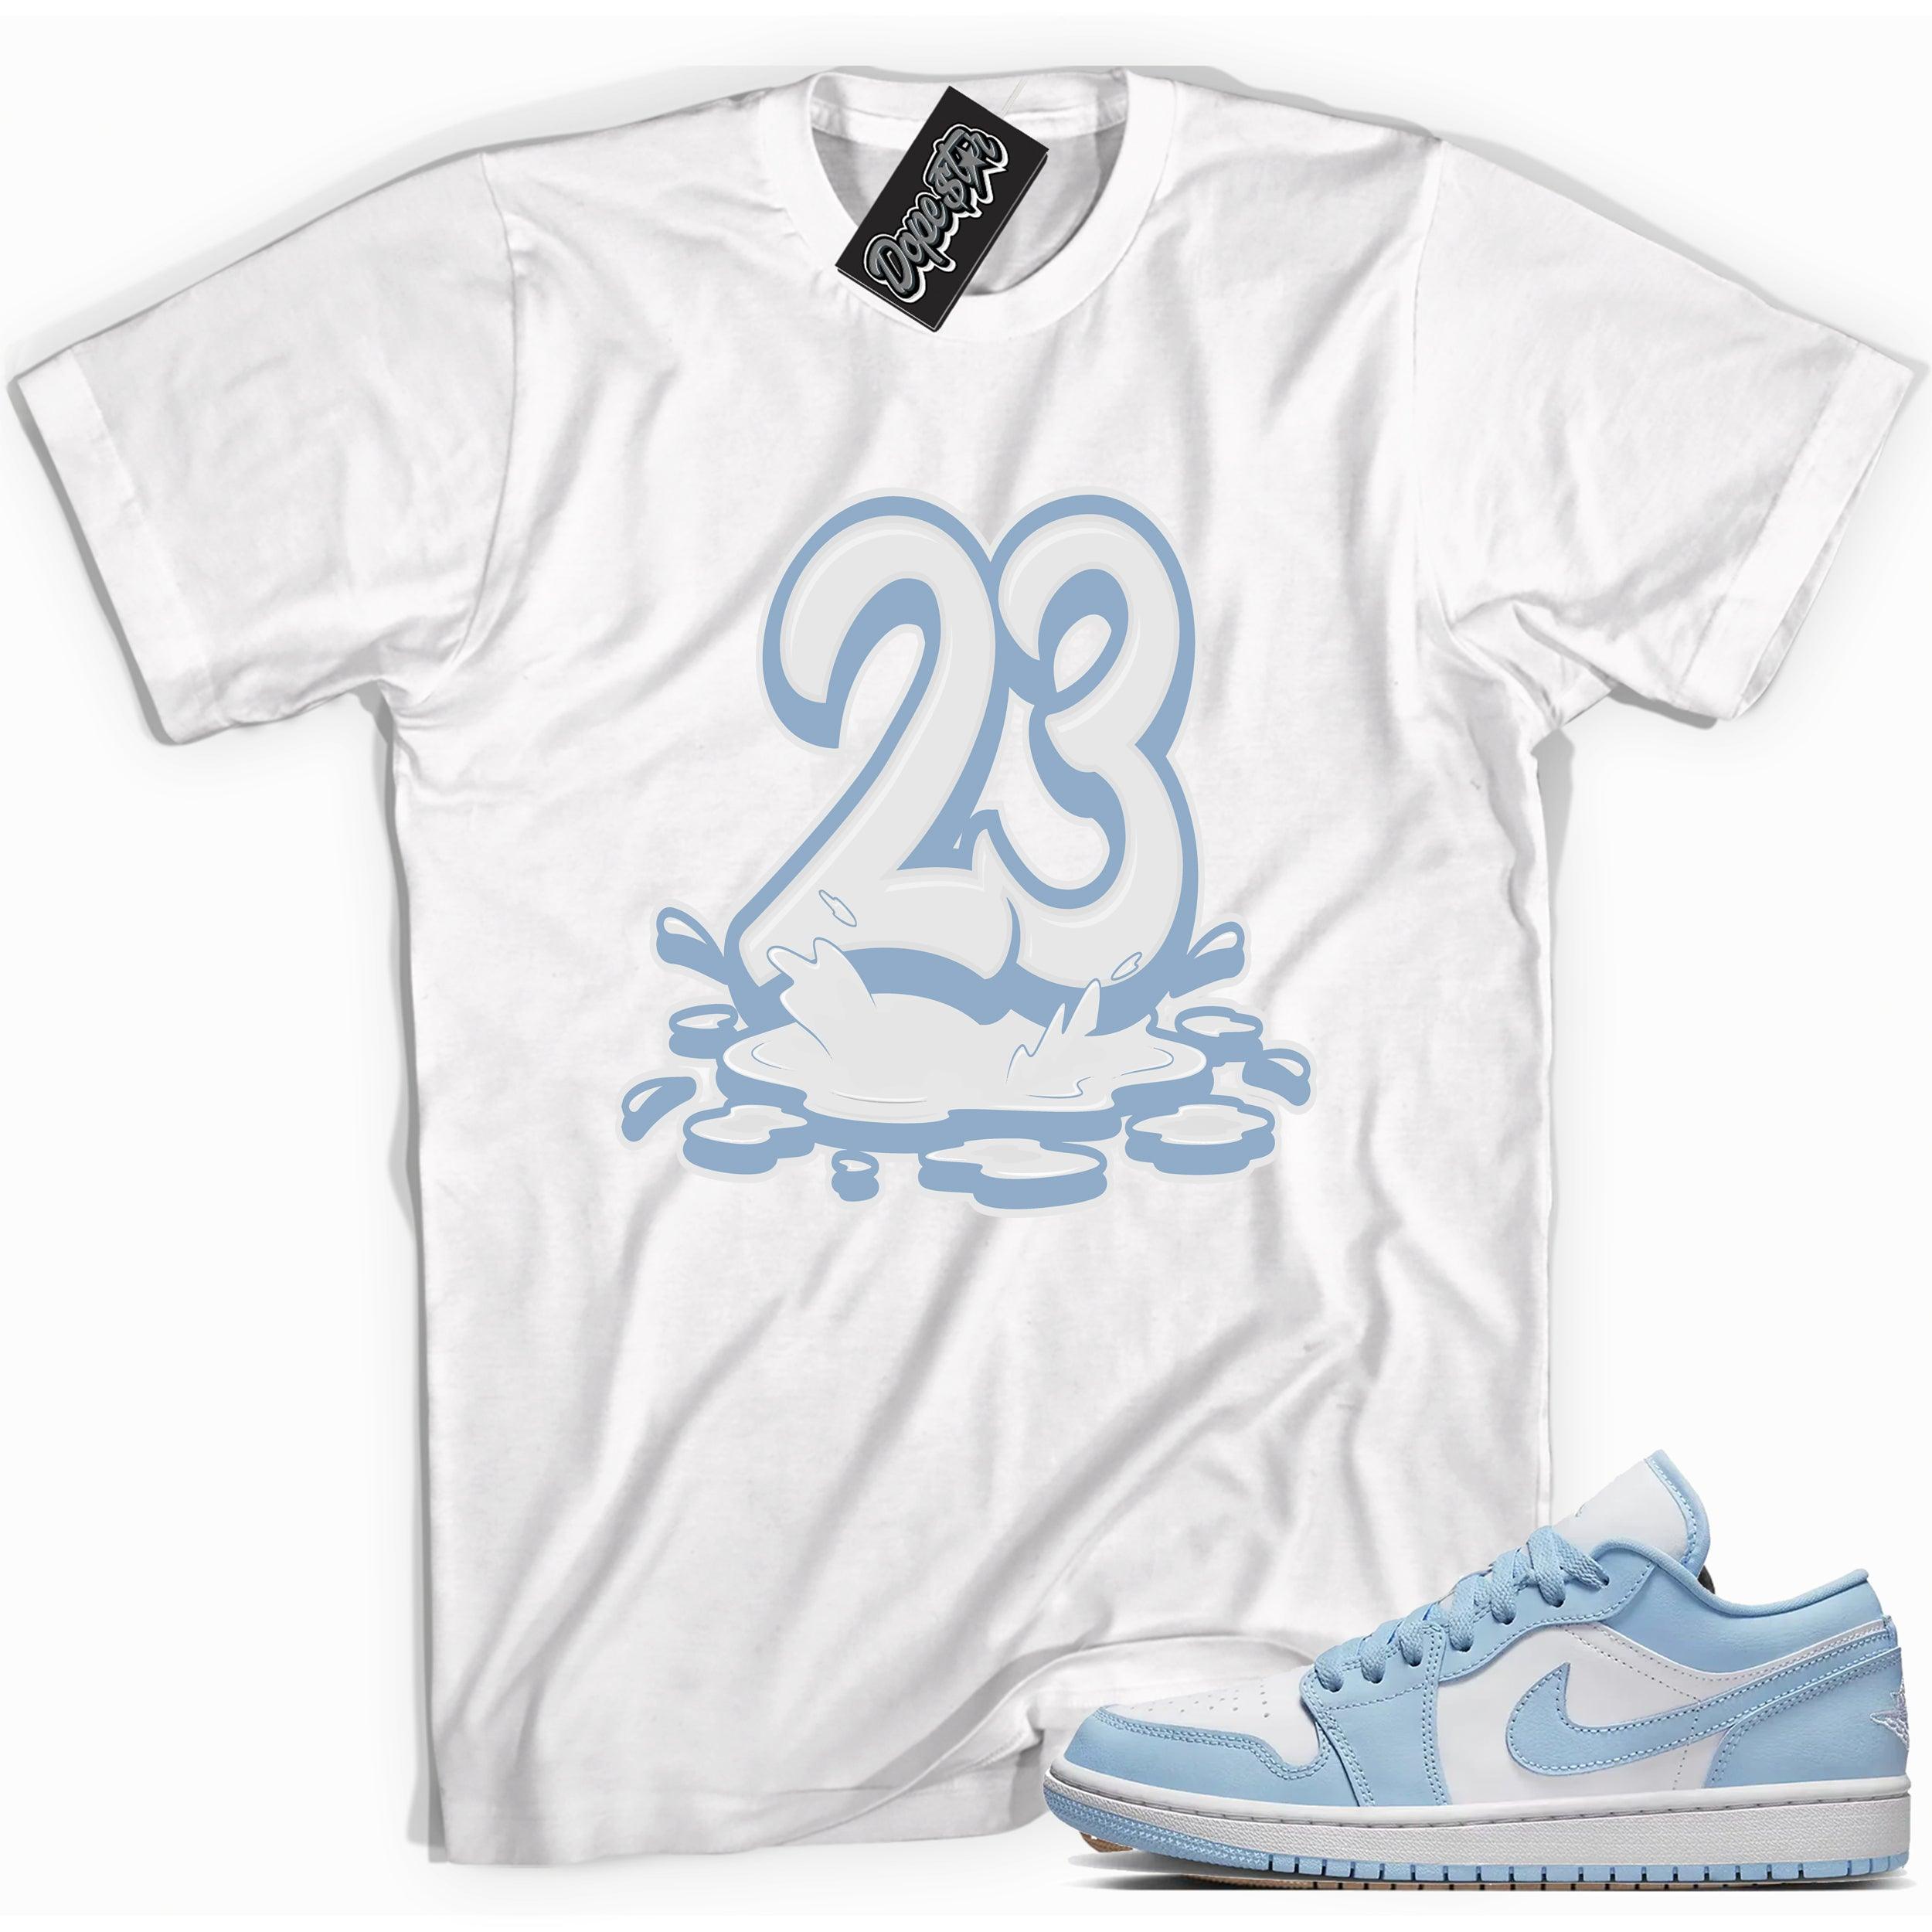 Cool White graphic tee with “ 23 Melting ” print, that perfectly matches  AJ 1 Low Aluminum sneakers. 